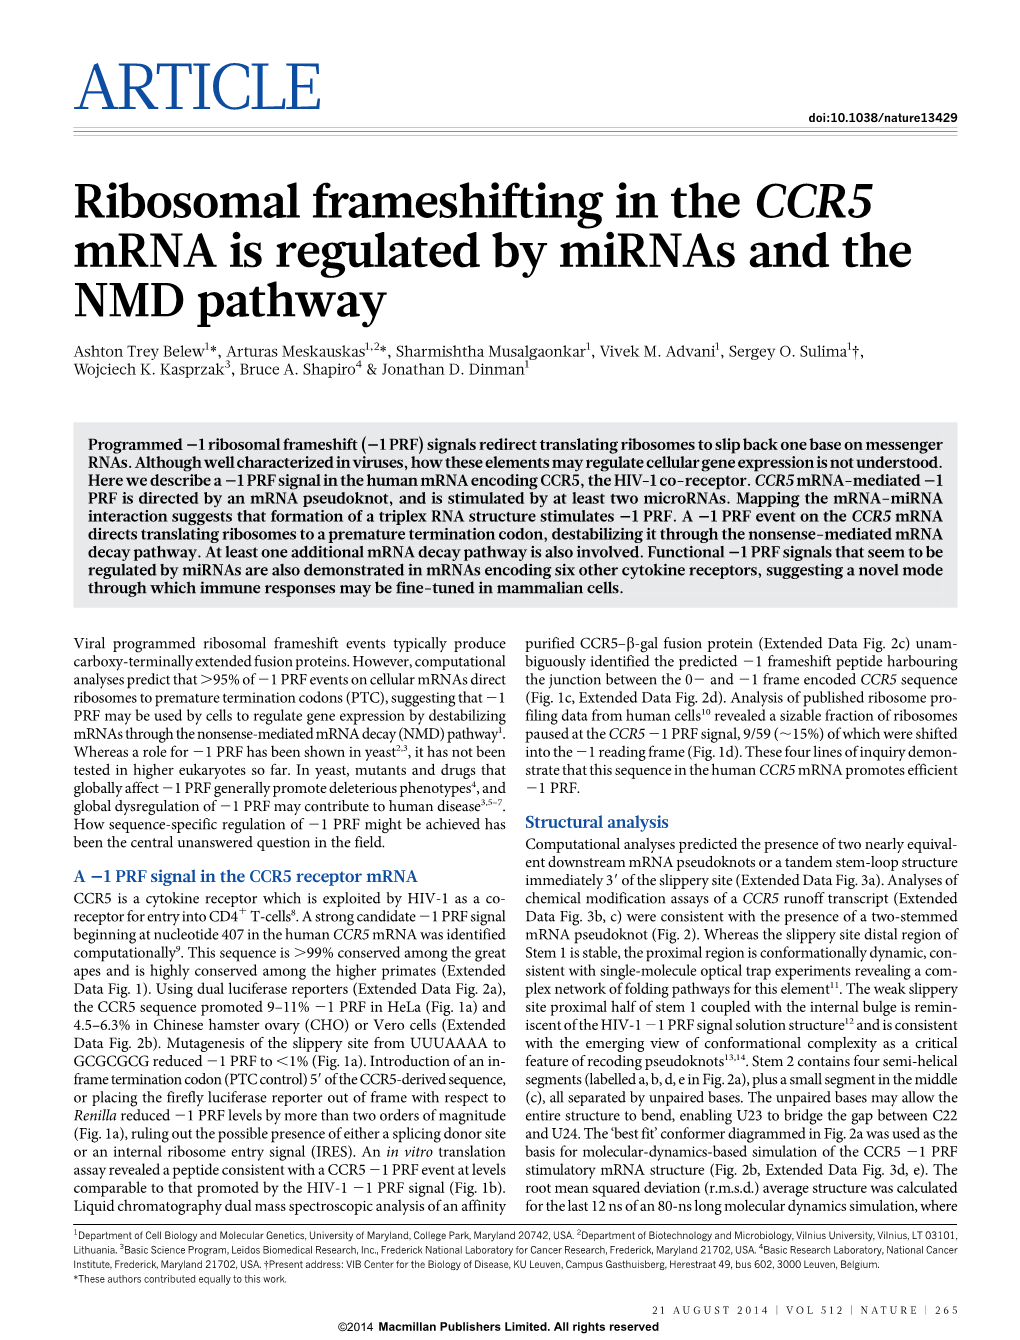 Ribosomal Frameshifting in the CCR5 Mrna Is Regulated by Mirnas and the NMD Pathway